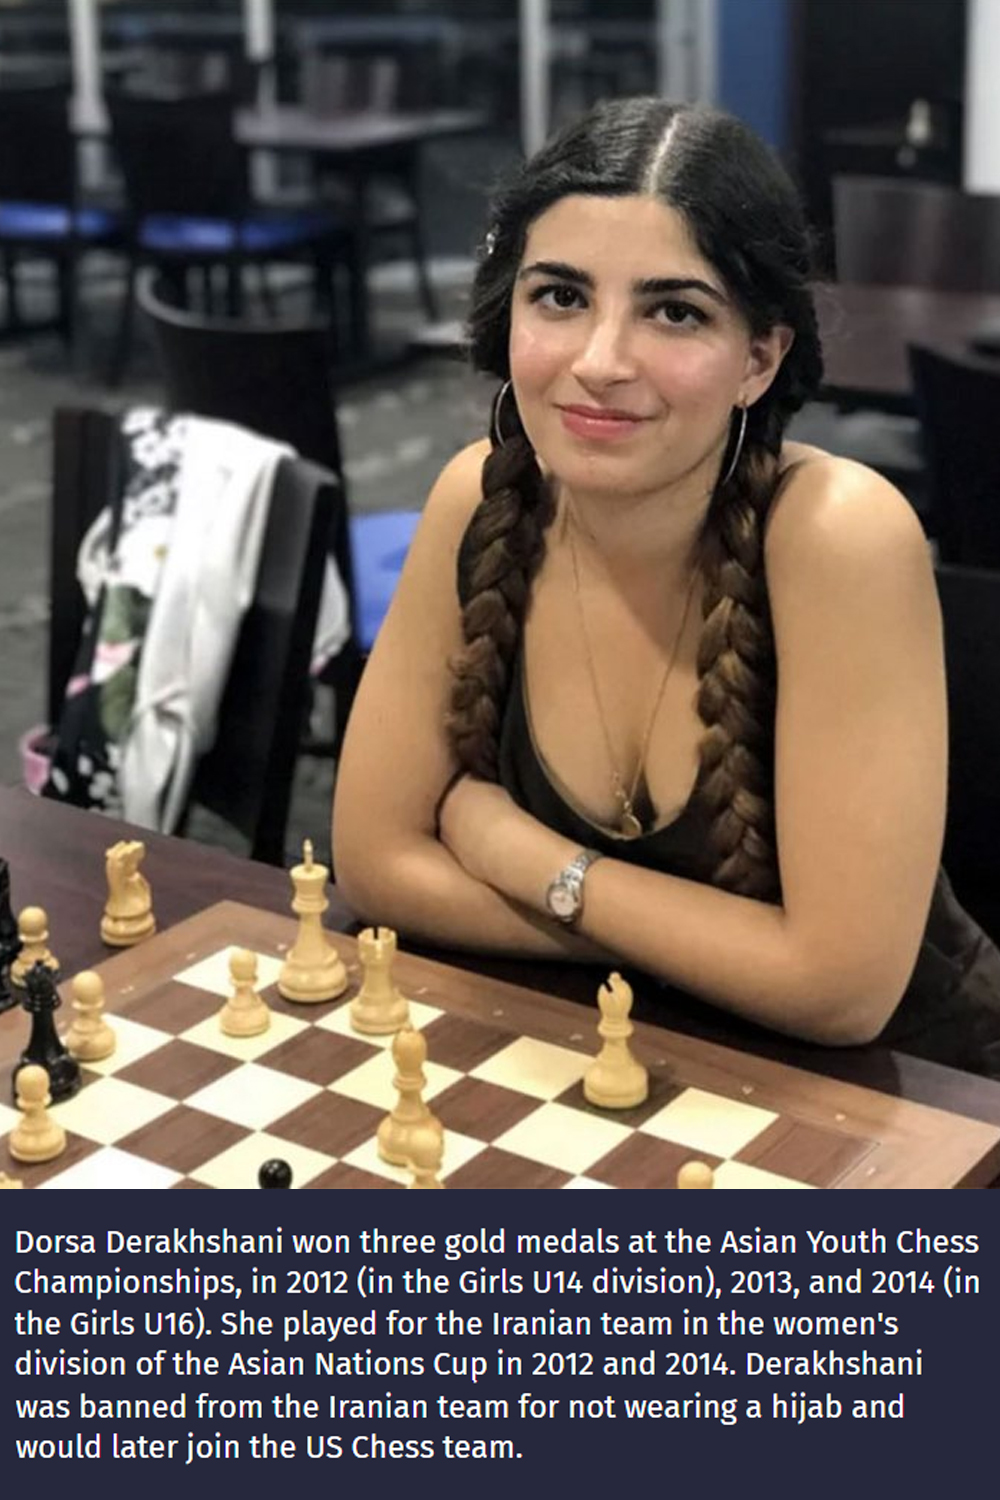 fascinating photos - iranian female chess player - Dorsa Derakhshani won three gold medals at the Asian Youth Chess Championships, in 2012 in the Girls U14 division, 2013, and 2014 in the Girls U16. She played for the Iranian team in the women's division 